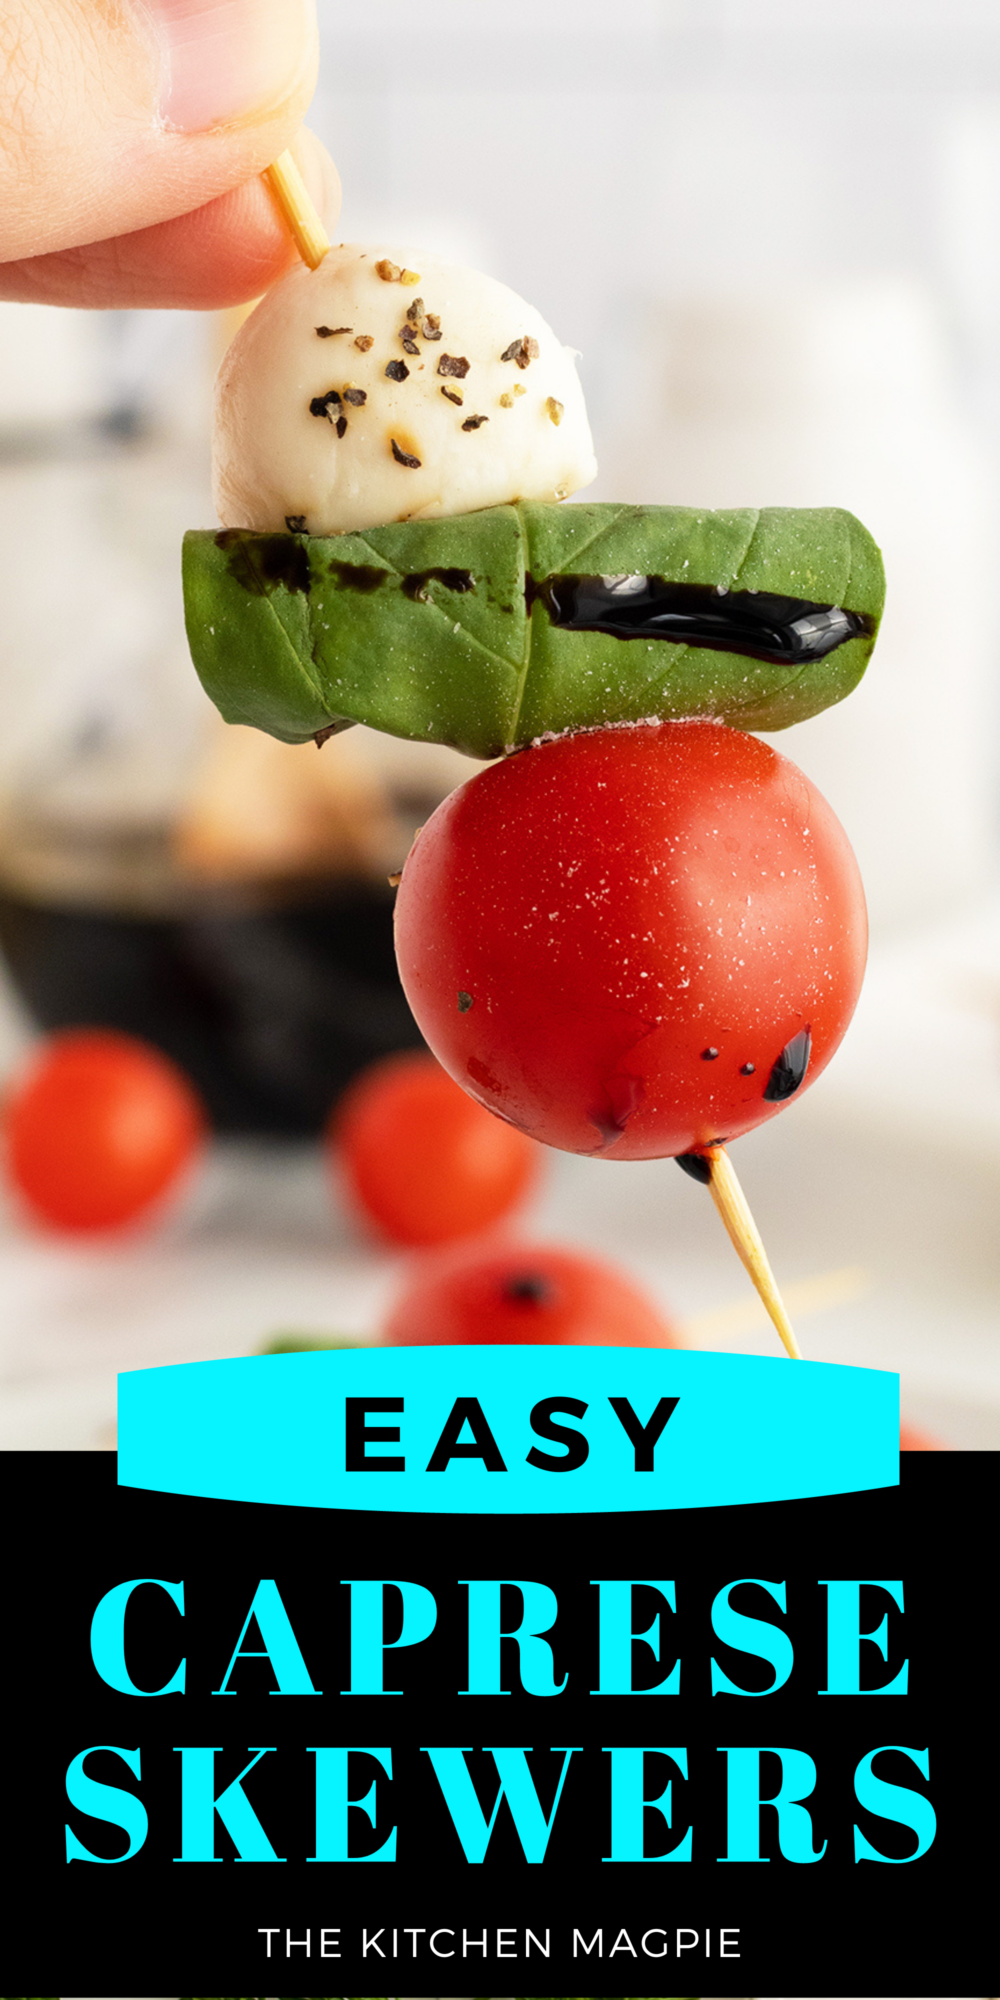 With this recipe for a simple Caprese skewer with balsamic drizzle , you can enjoy the time-honored appetizer in a whole new way!